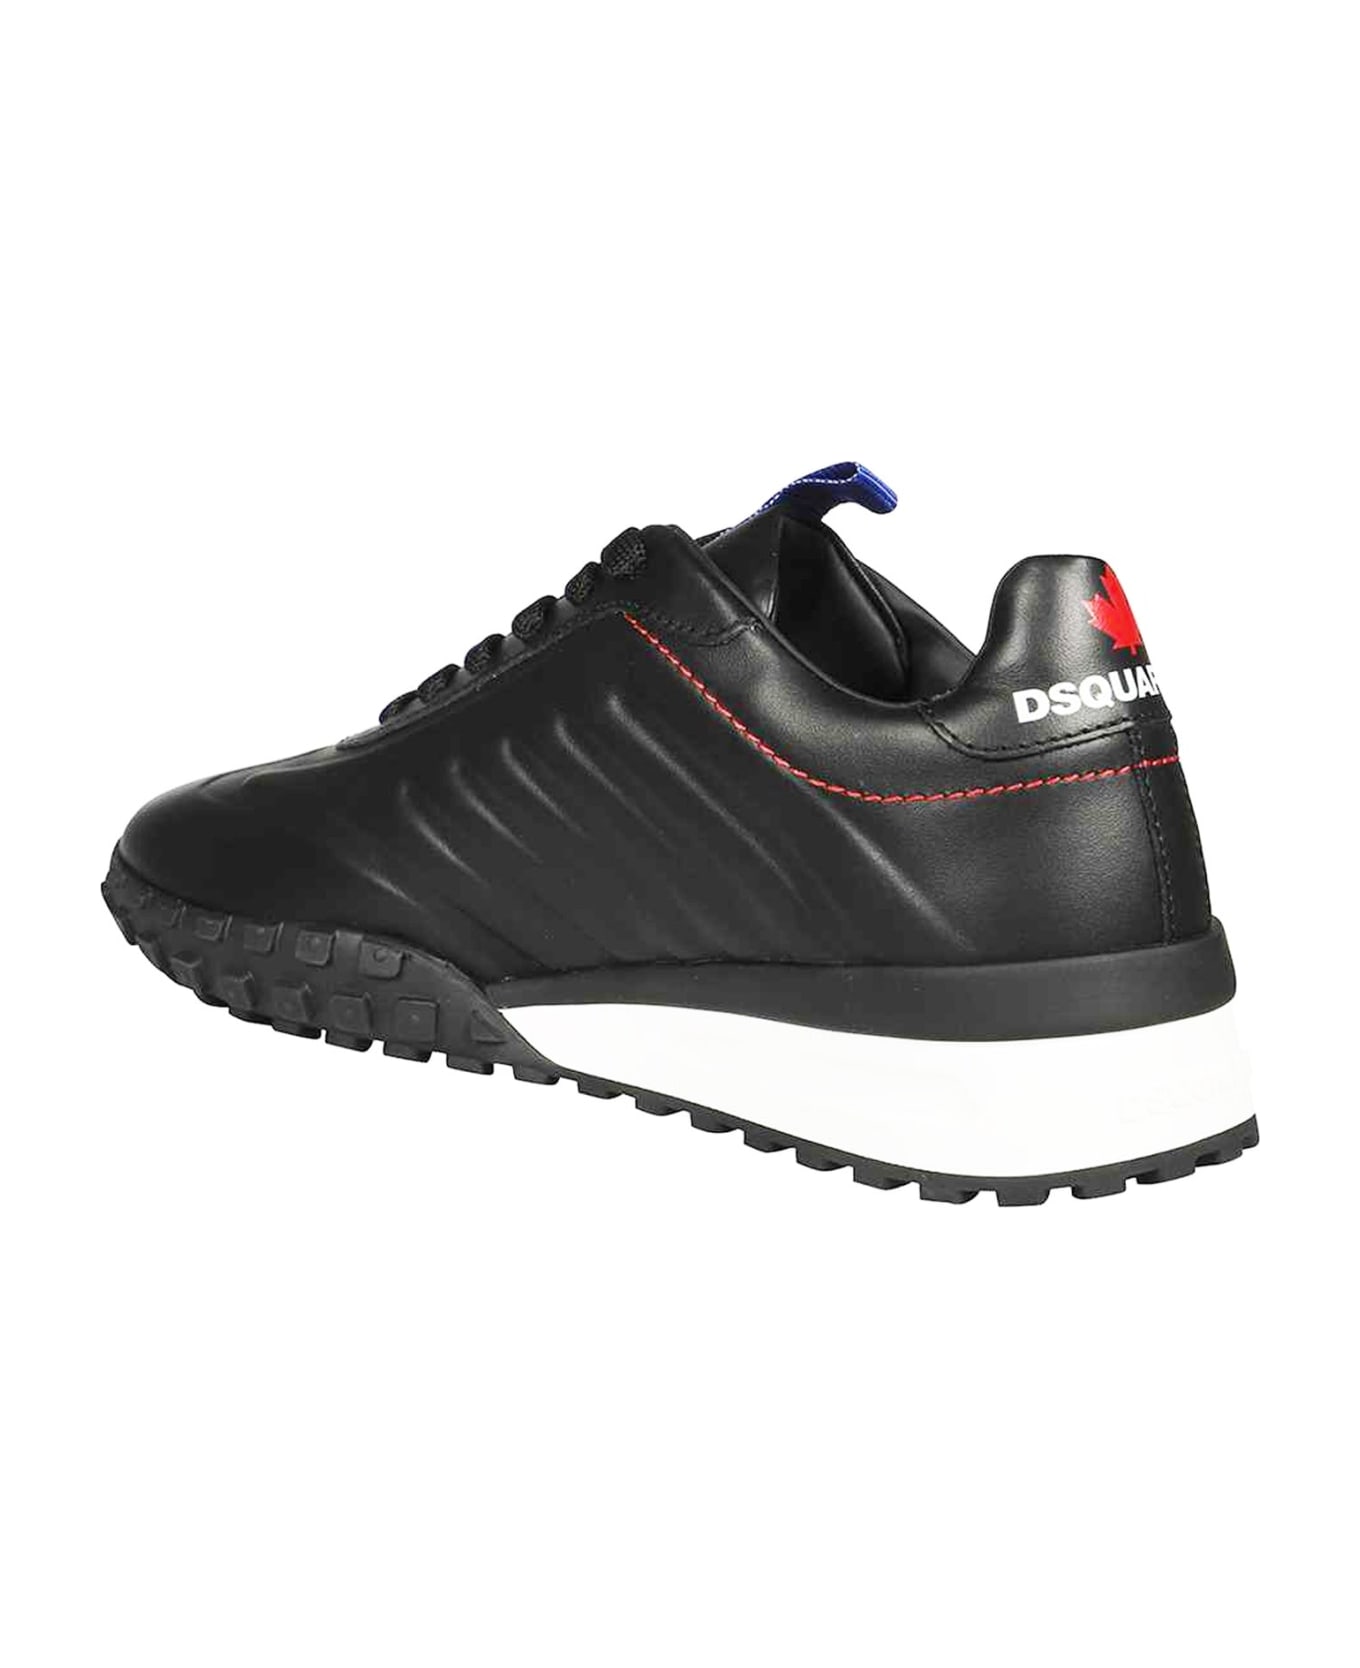 Dsquared2 Legend Leather Sneakers - Black スニーカー